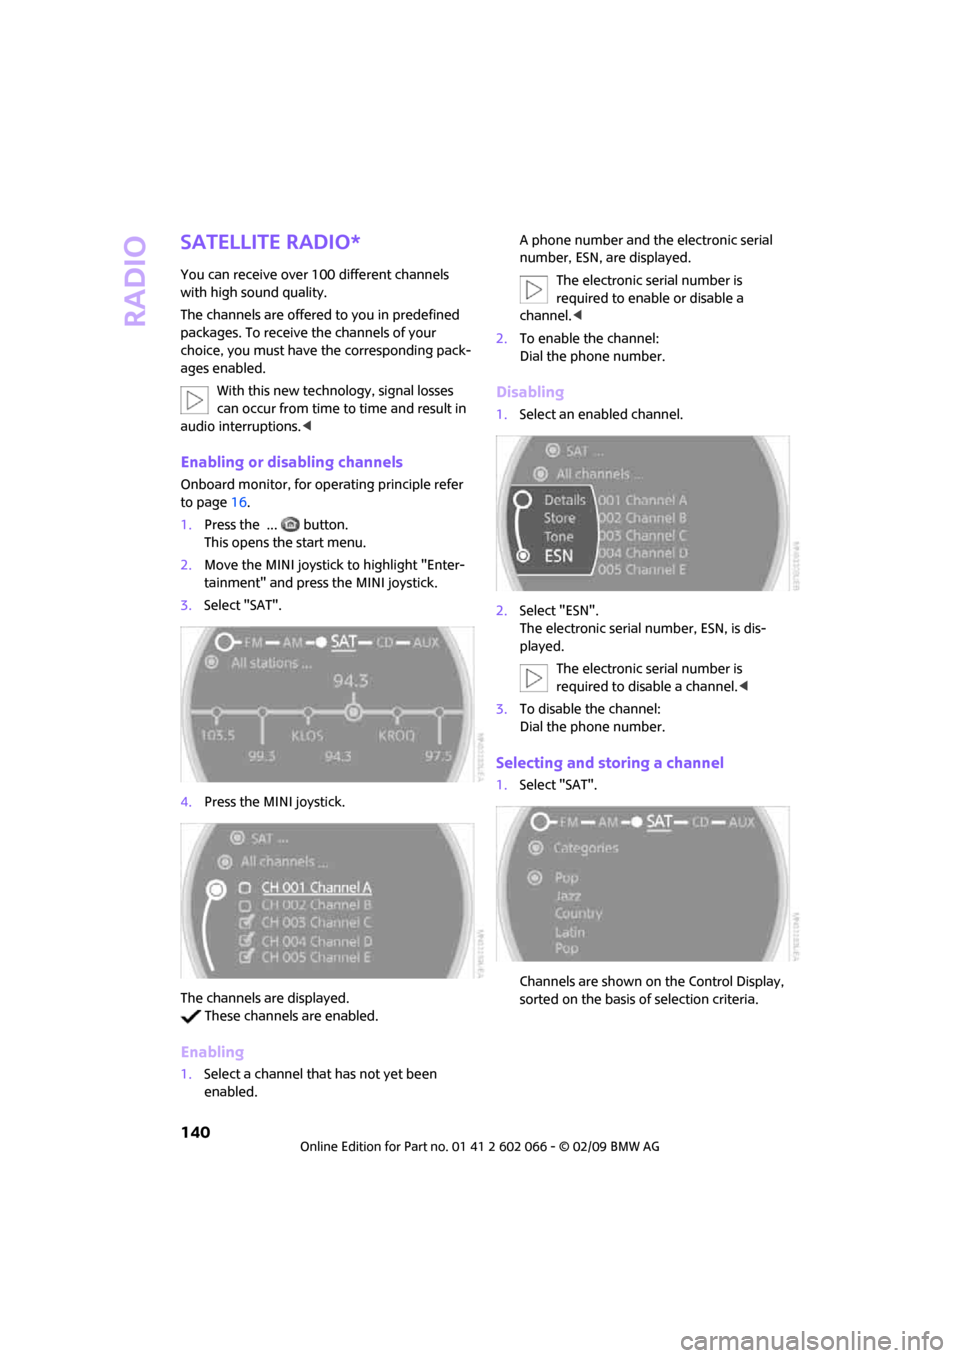 MINI Clubman 2009   (Mini Connected) Owners Guide Radio
140
Satellite radio*
You can receive over 100 different channels 
with high sound quality.
The channels are offered to you in predefined 
packages. To receive the channels of your 
choice, you m